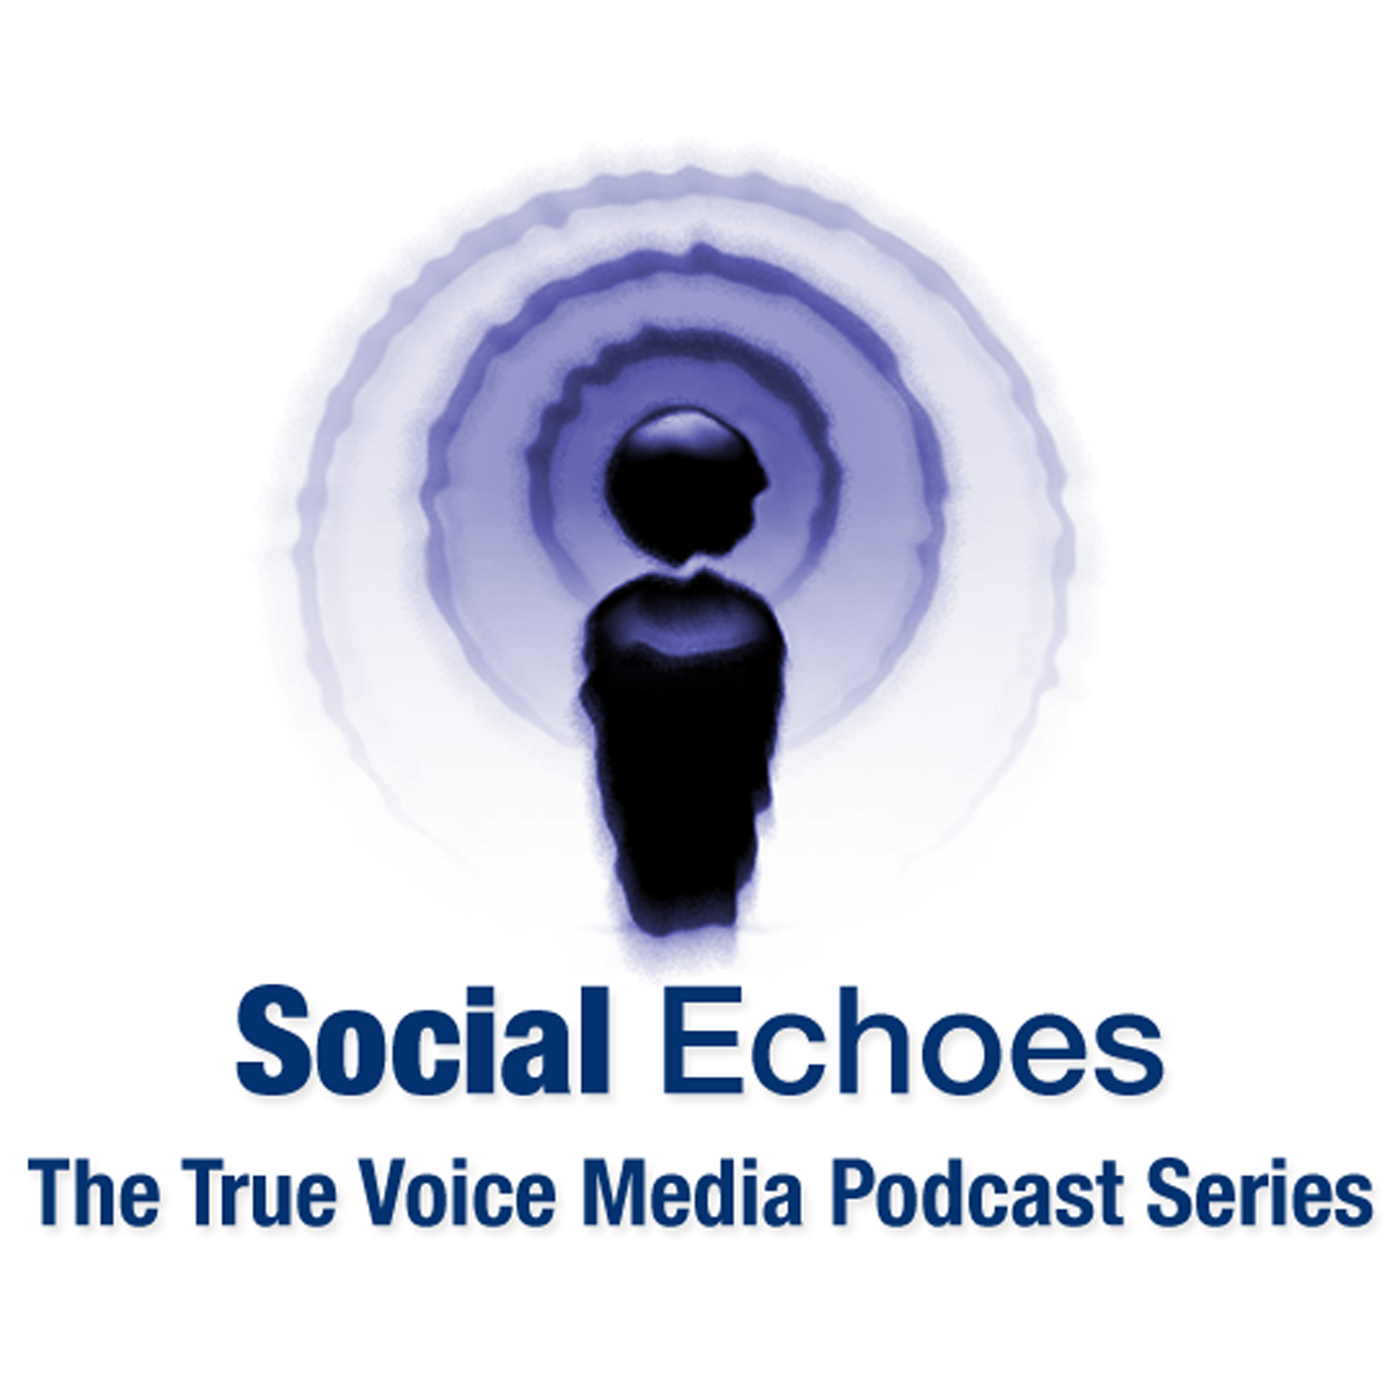 Social Echoes: A True Voice Media Podcast